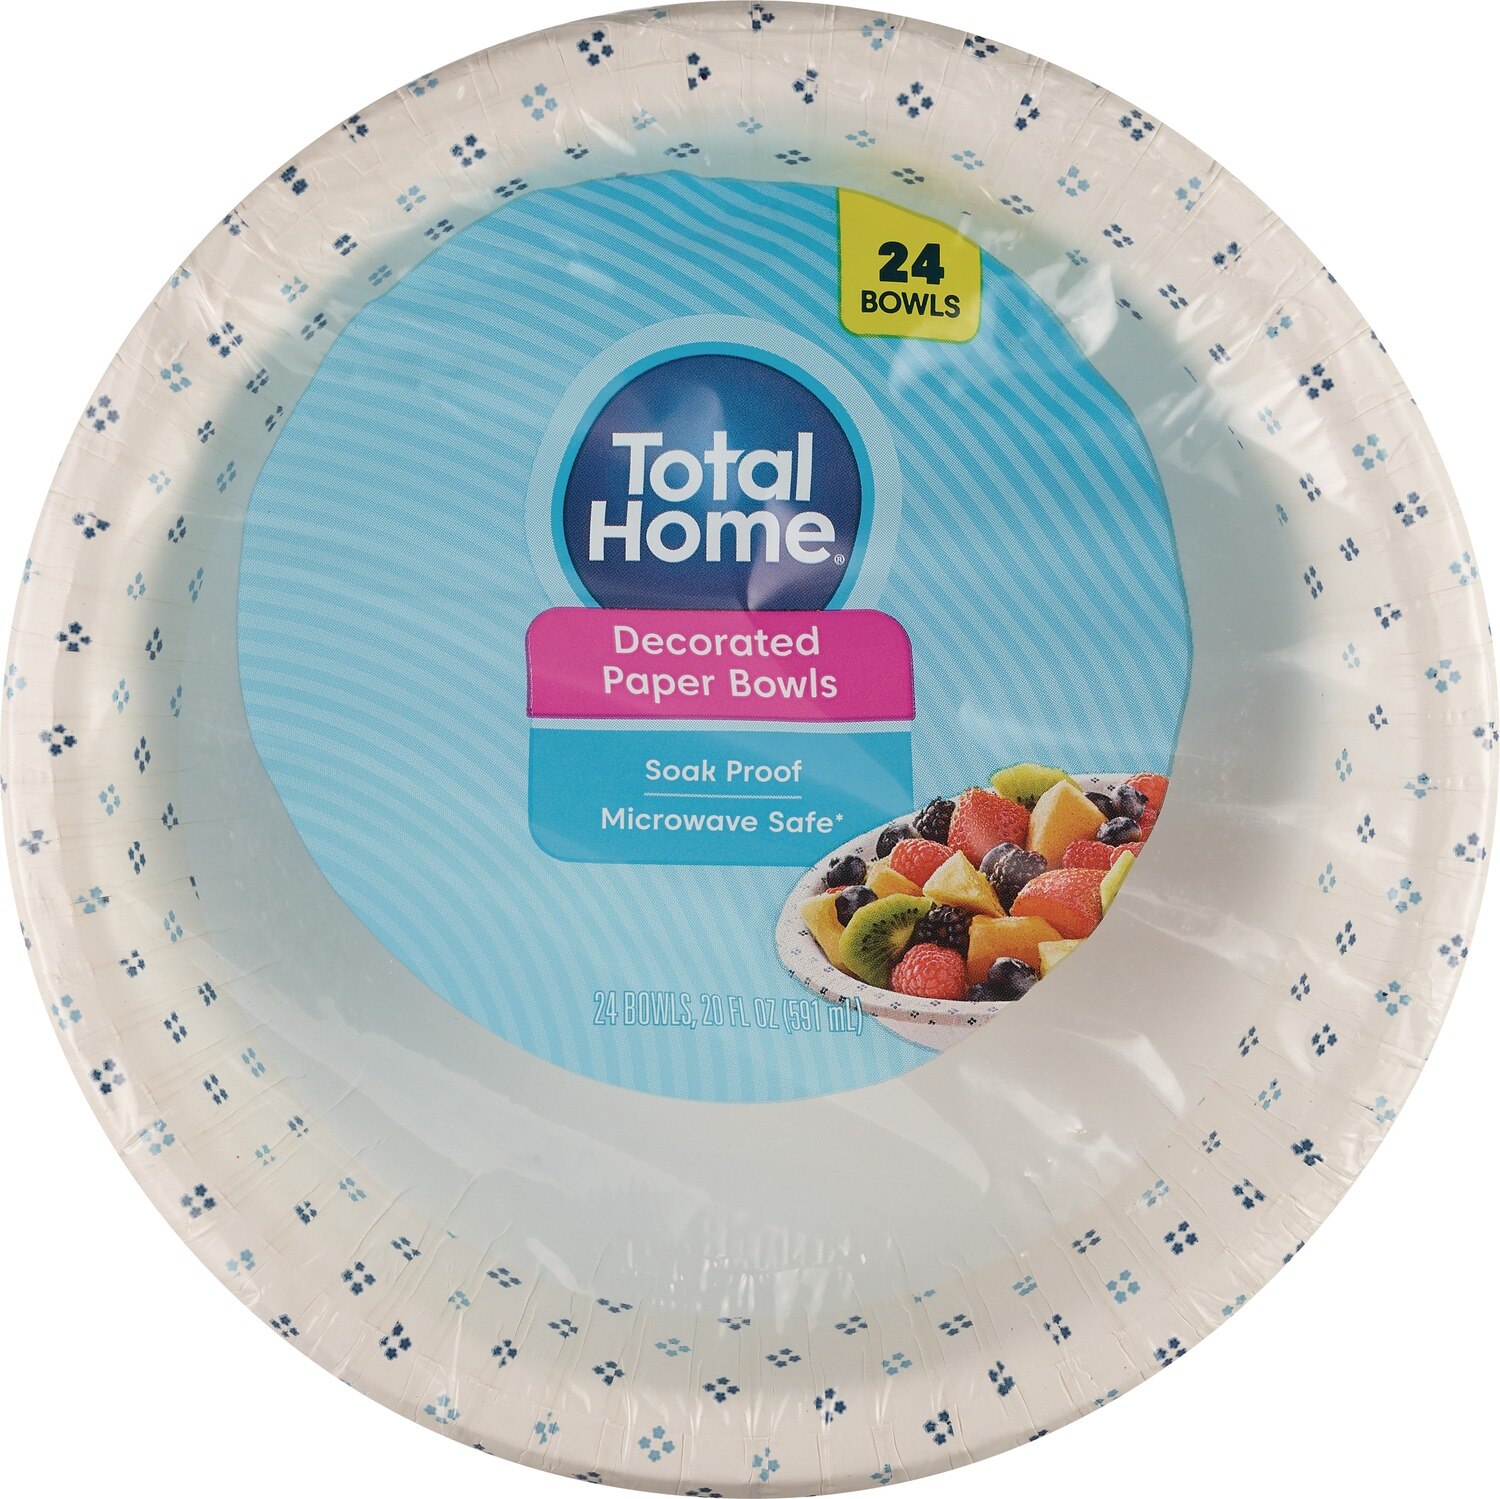 Total Home Decorated Paper Bowls 20 oz, 24 ct